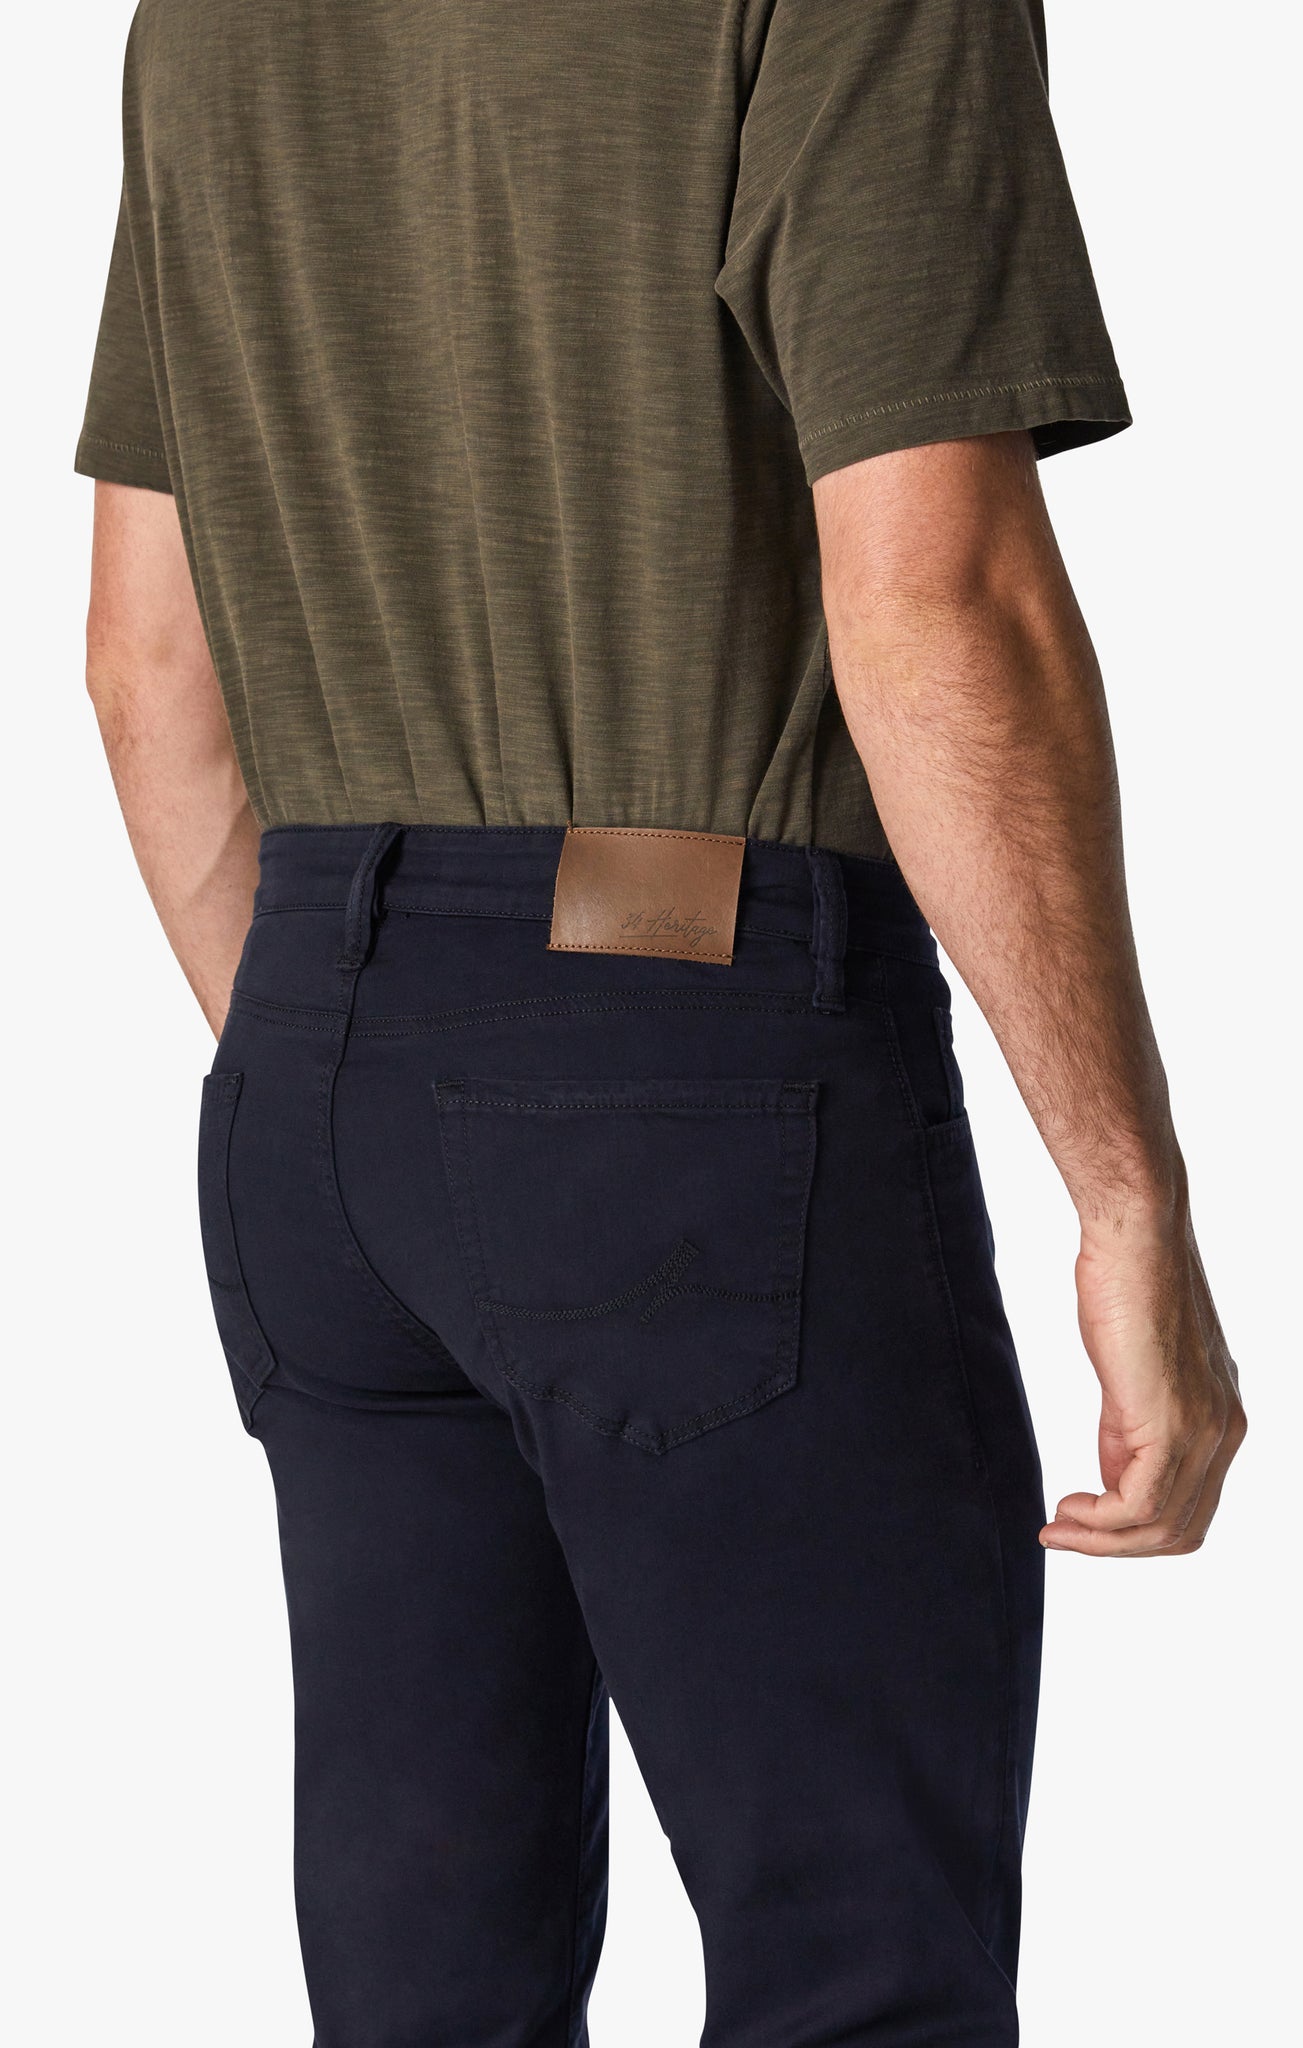 Courage Straight Leg Pants in Navy Twill